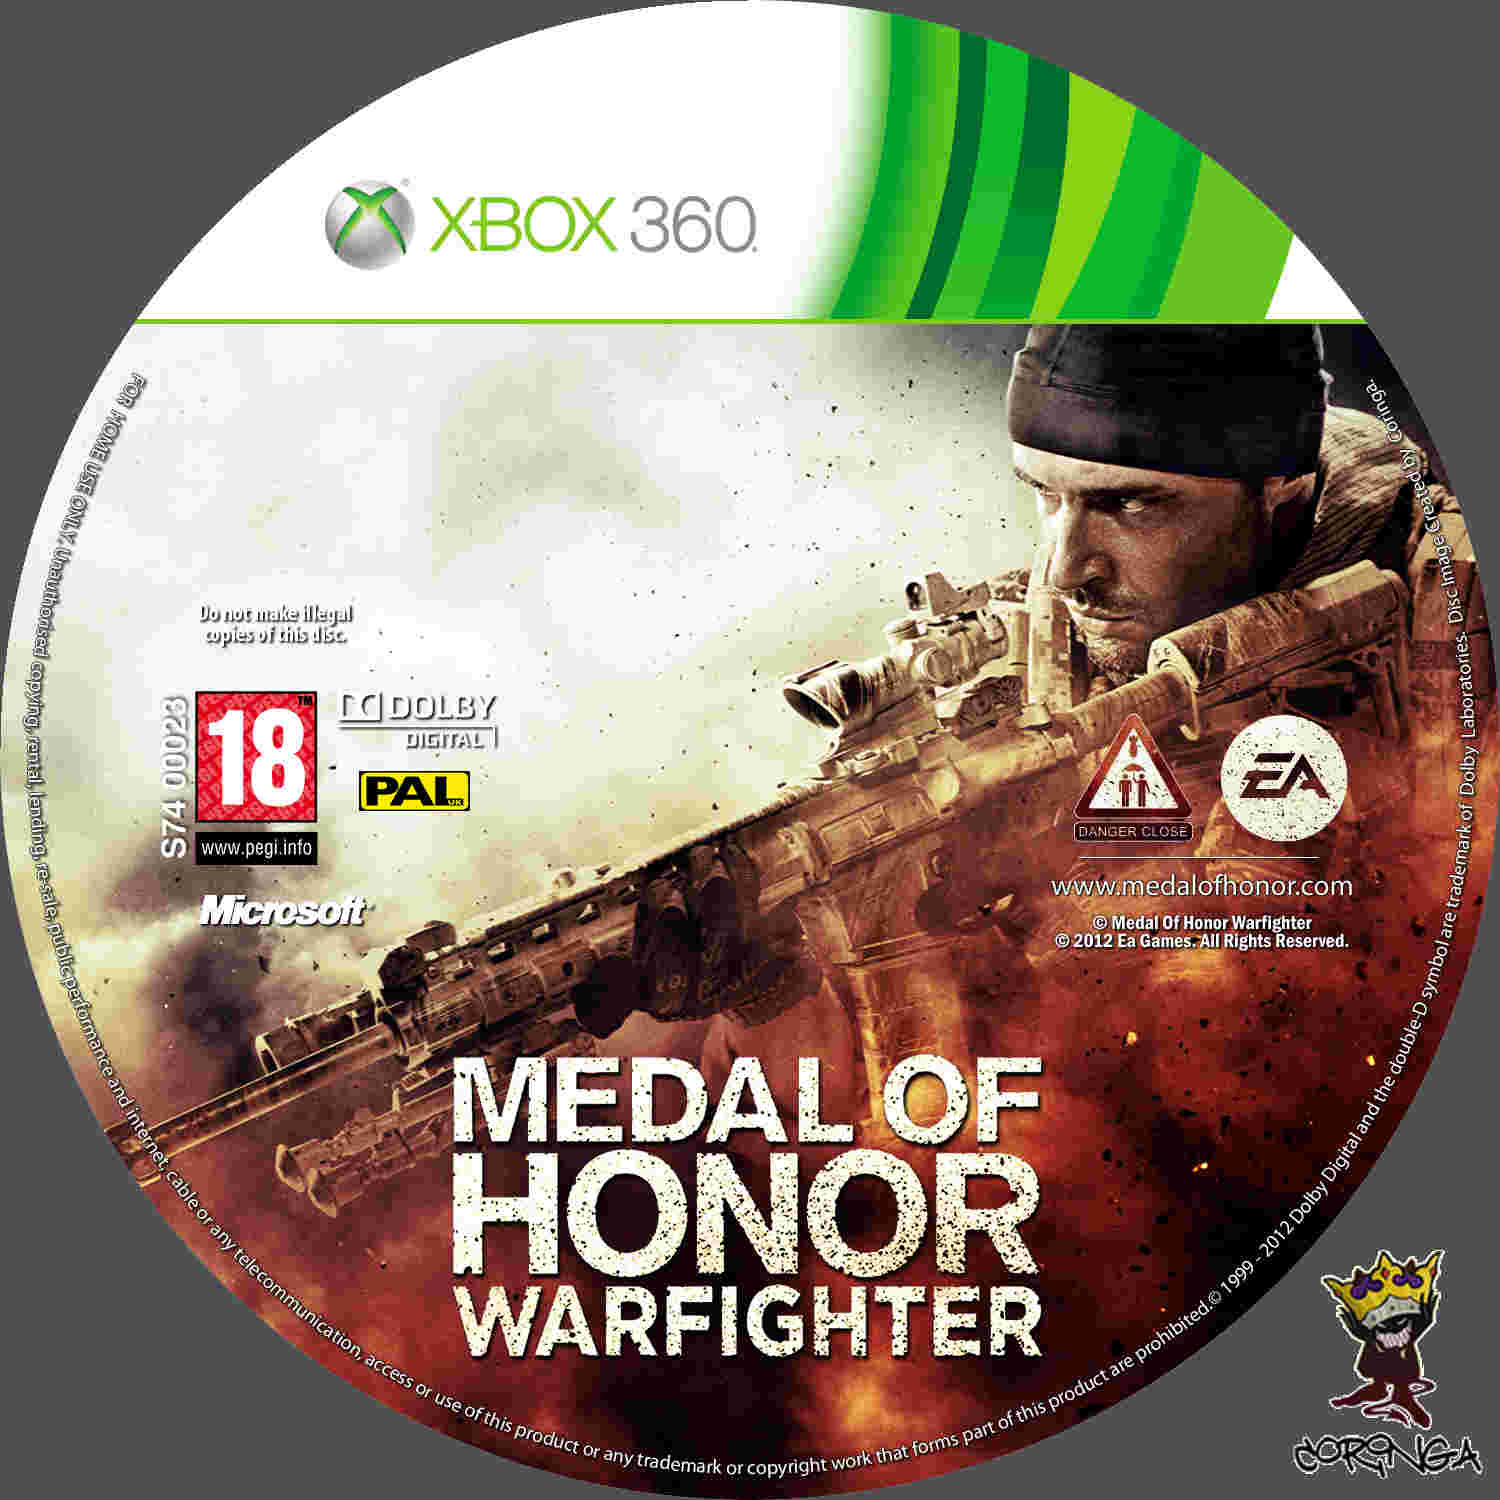 Medal of honor чит. Medal of Honor Xbox 360 обложка. Medal of Honor ps3 обложка. Medal of Honor Warfighter Xbox 360. Xbox 360 обложка диска Medal of Honor Warfighter.